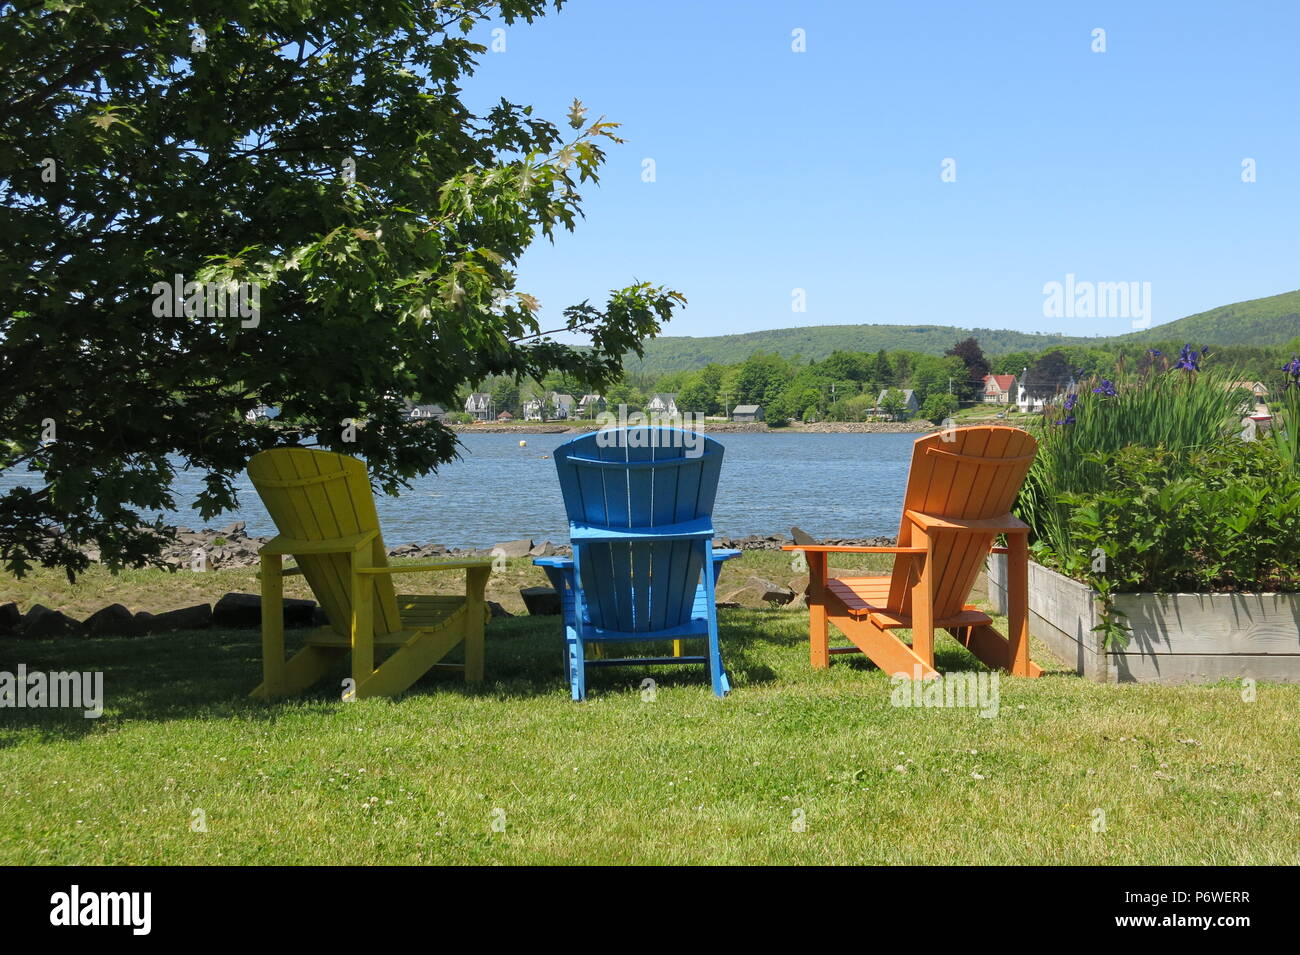 A Row Of Brightly Coloured Adirondack Chairs To Relax And Admire